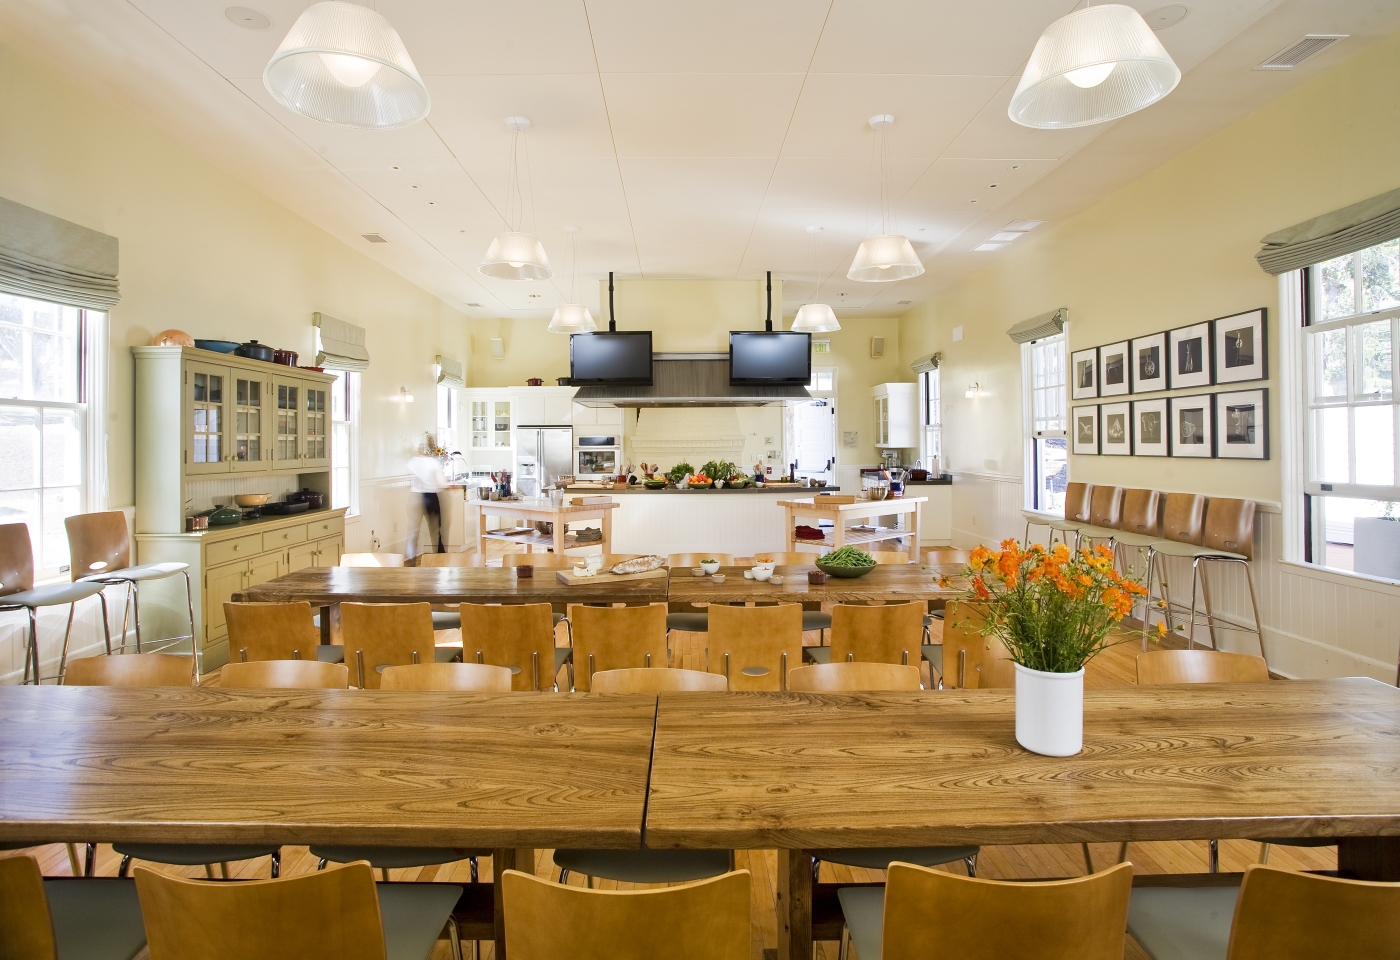 The Cavallo Point Cooking School